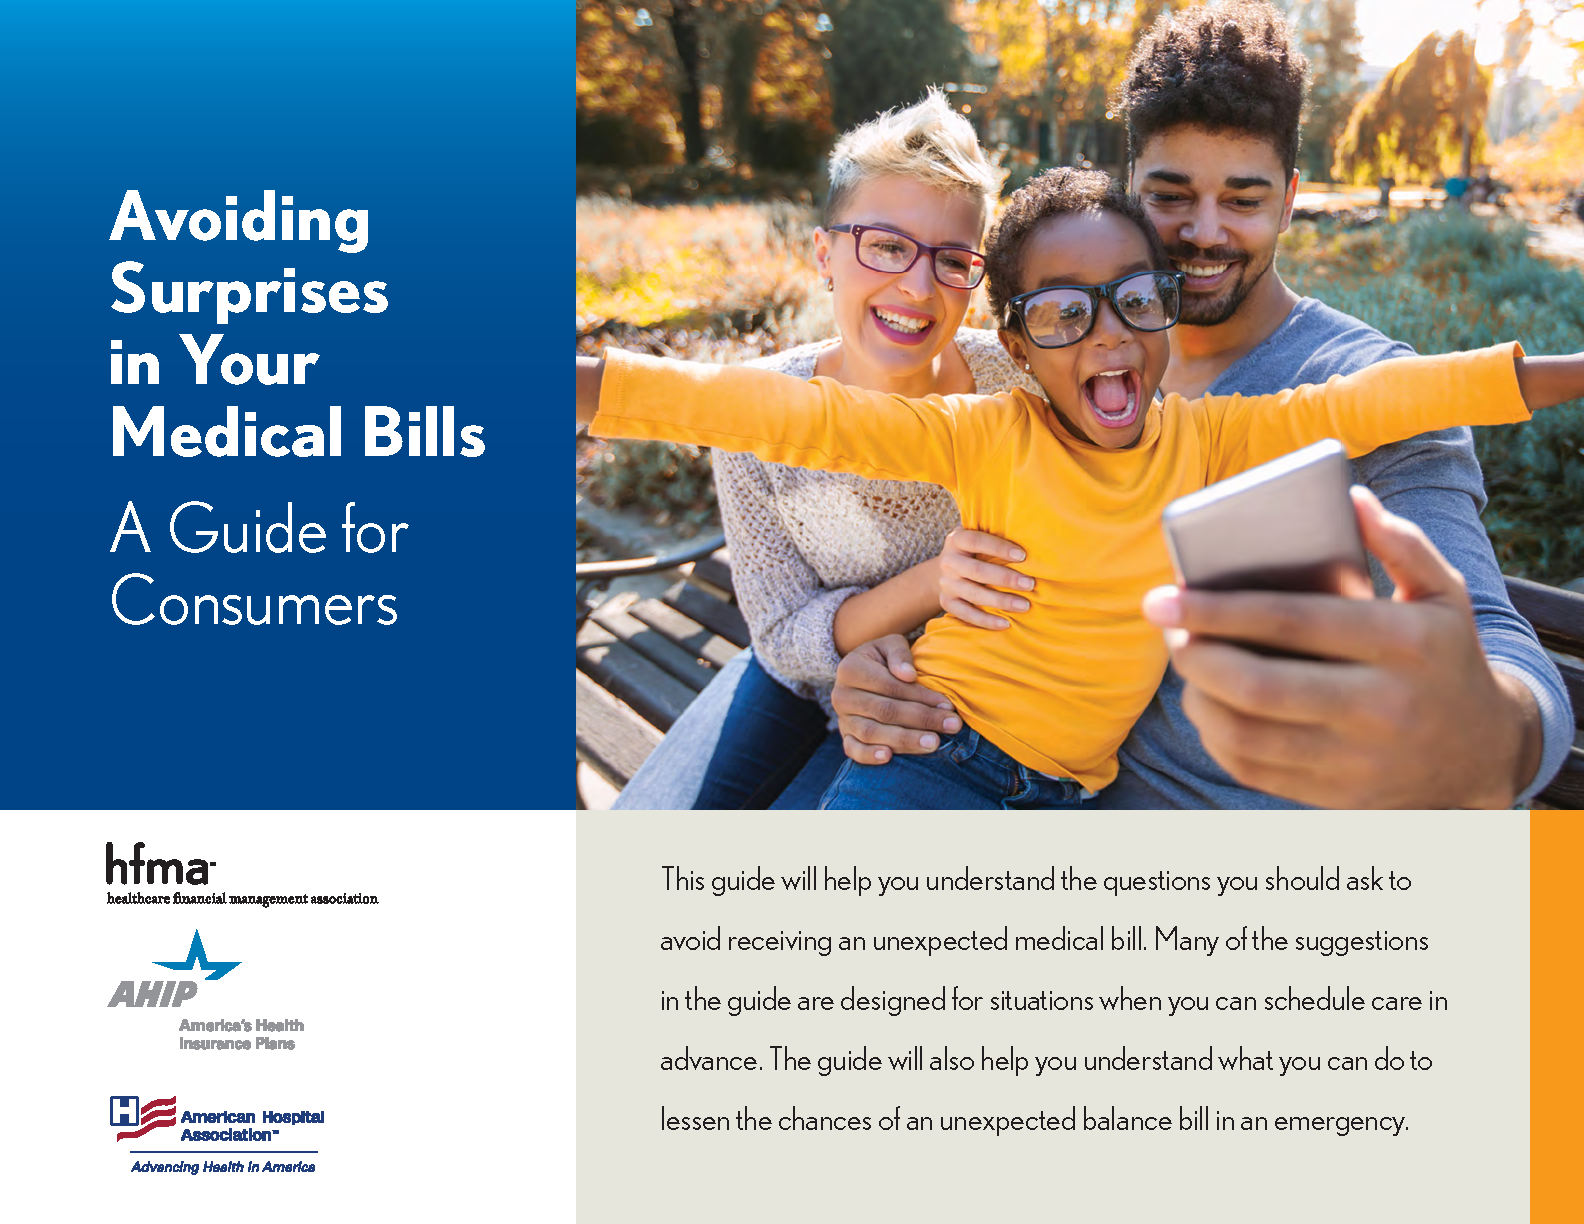 Download Avoiding Surprises in Your Medical Bills: A Guide for Consumers English-language version PDF